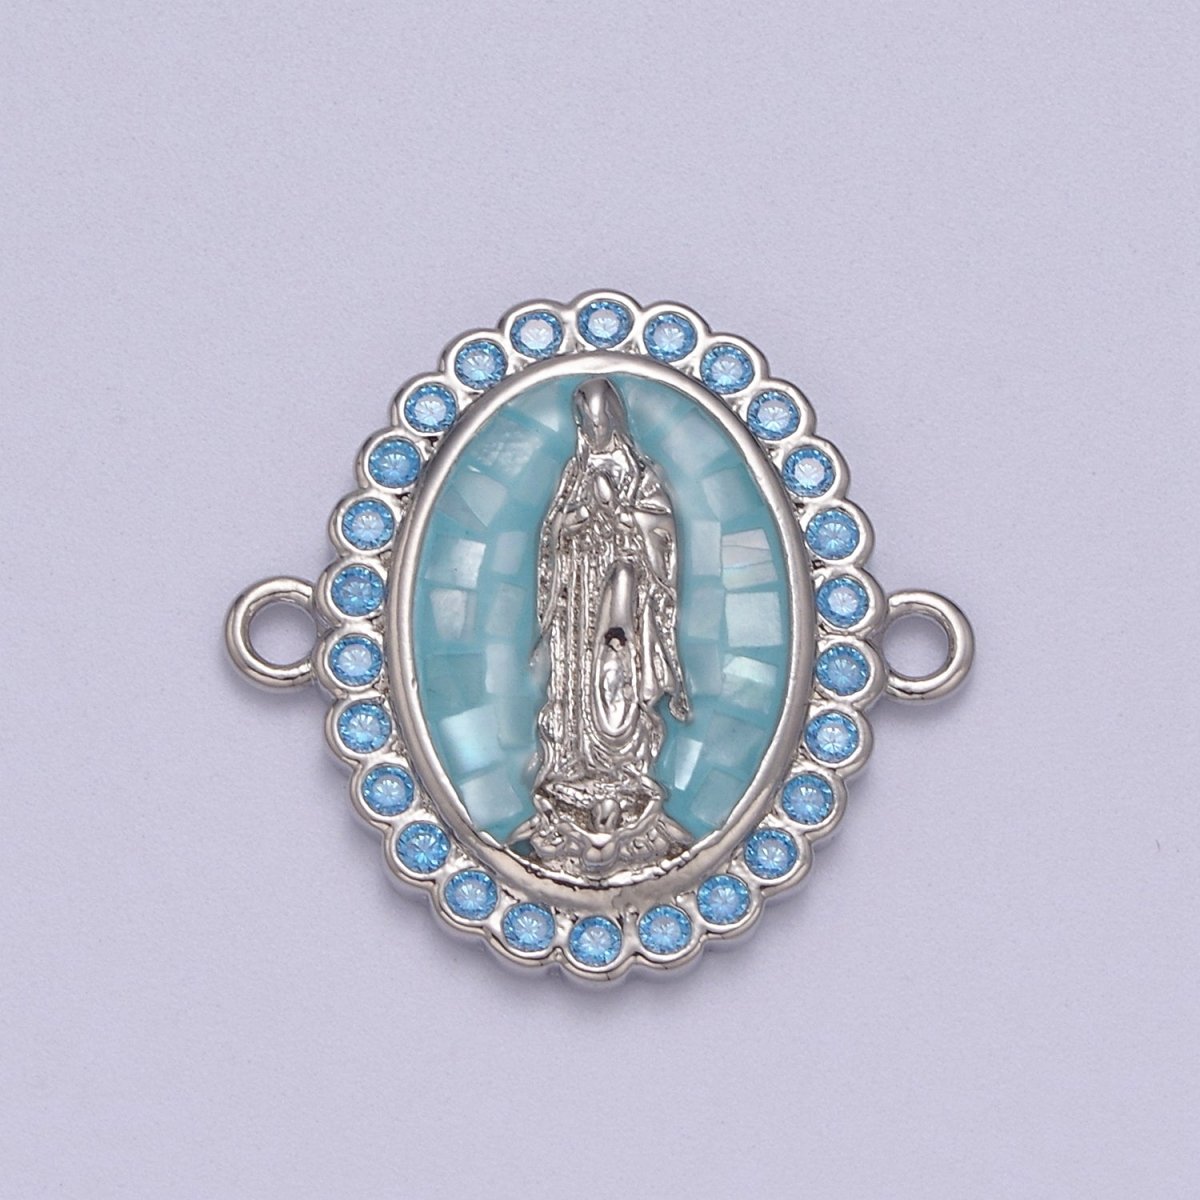 24k Gold Filled Micro Pave Lady Guadalupe Charm Connector, CZ Pave Virgin Mary Charm For Necklace, Bracelet Jewelry Making N-147 - N-156 - DLUXCA